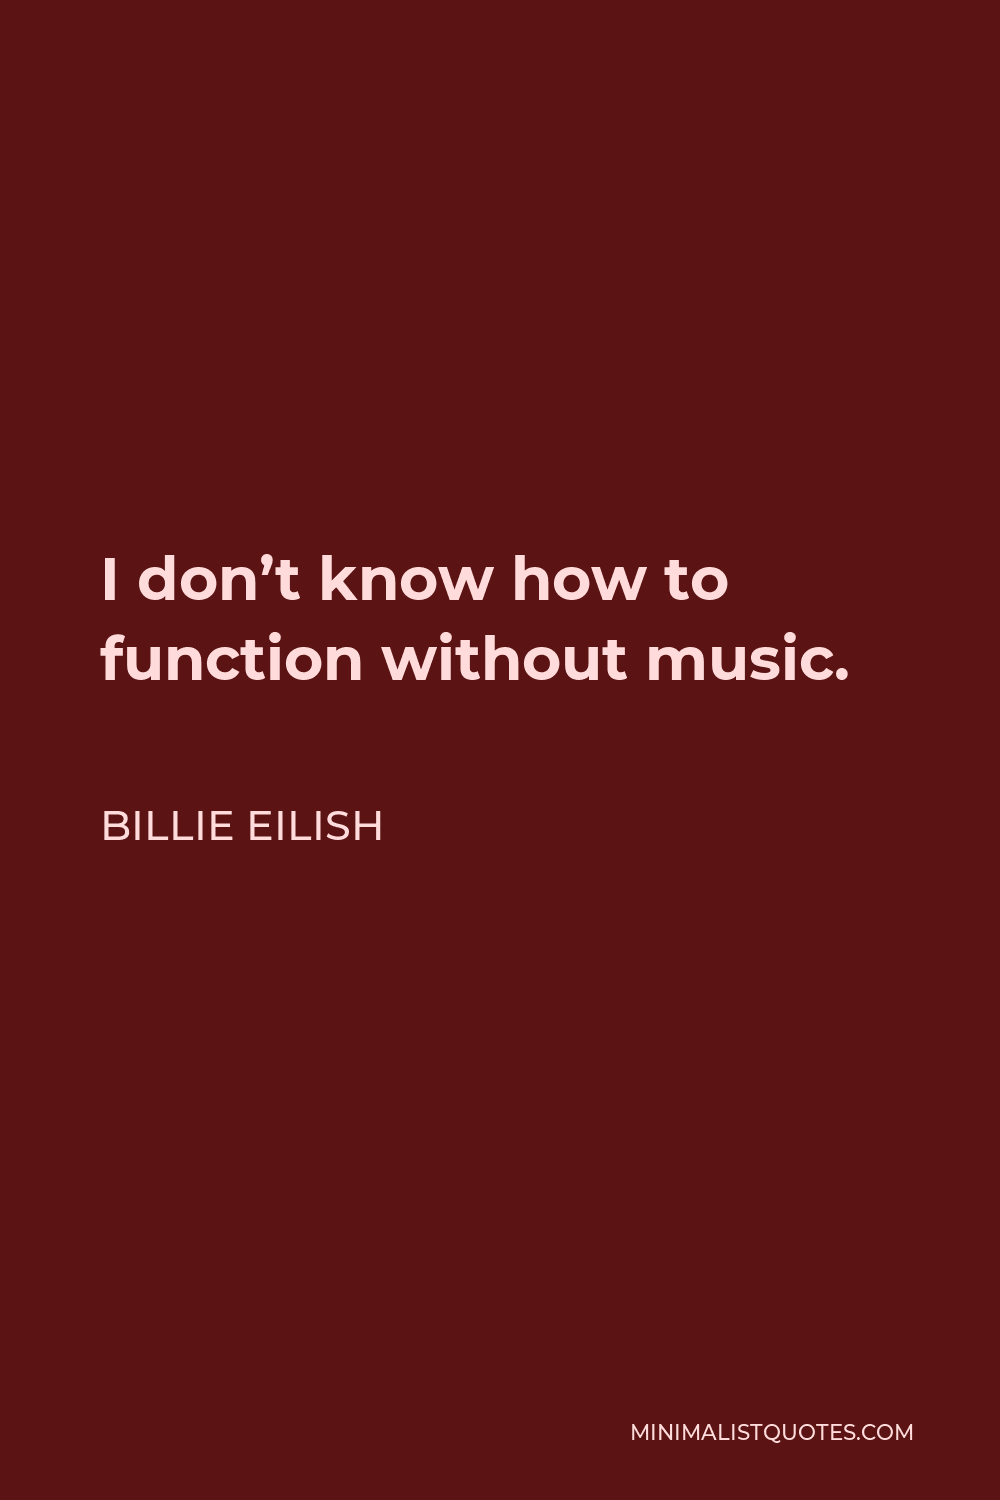 Billie Eilish Quote - I don’t know how to function without music.